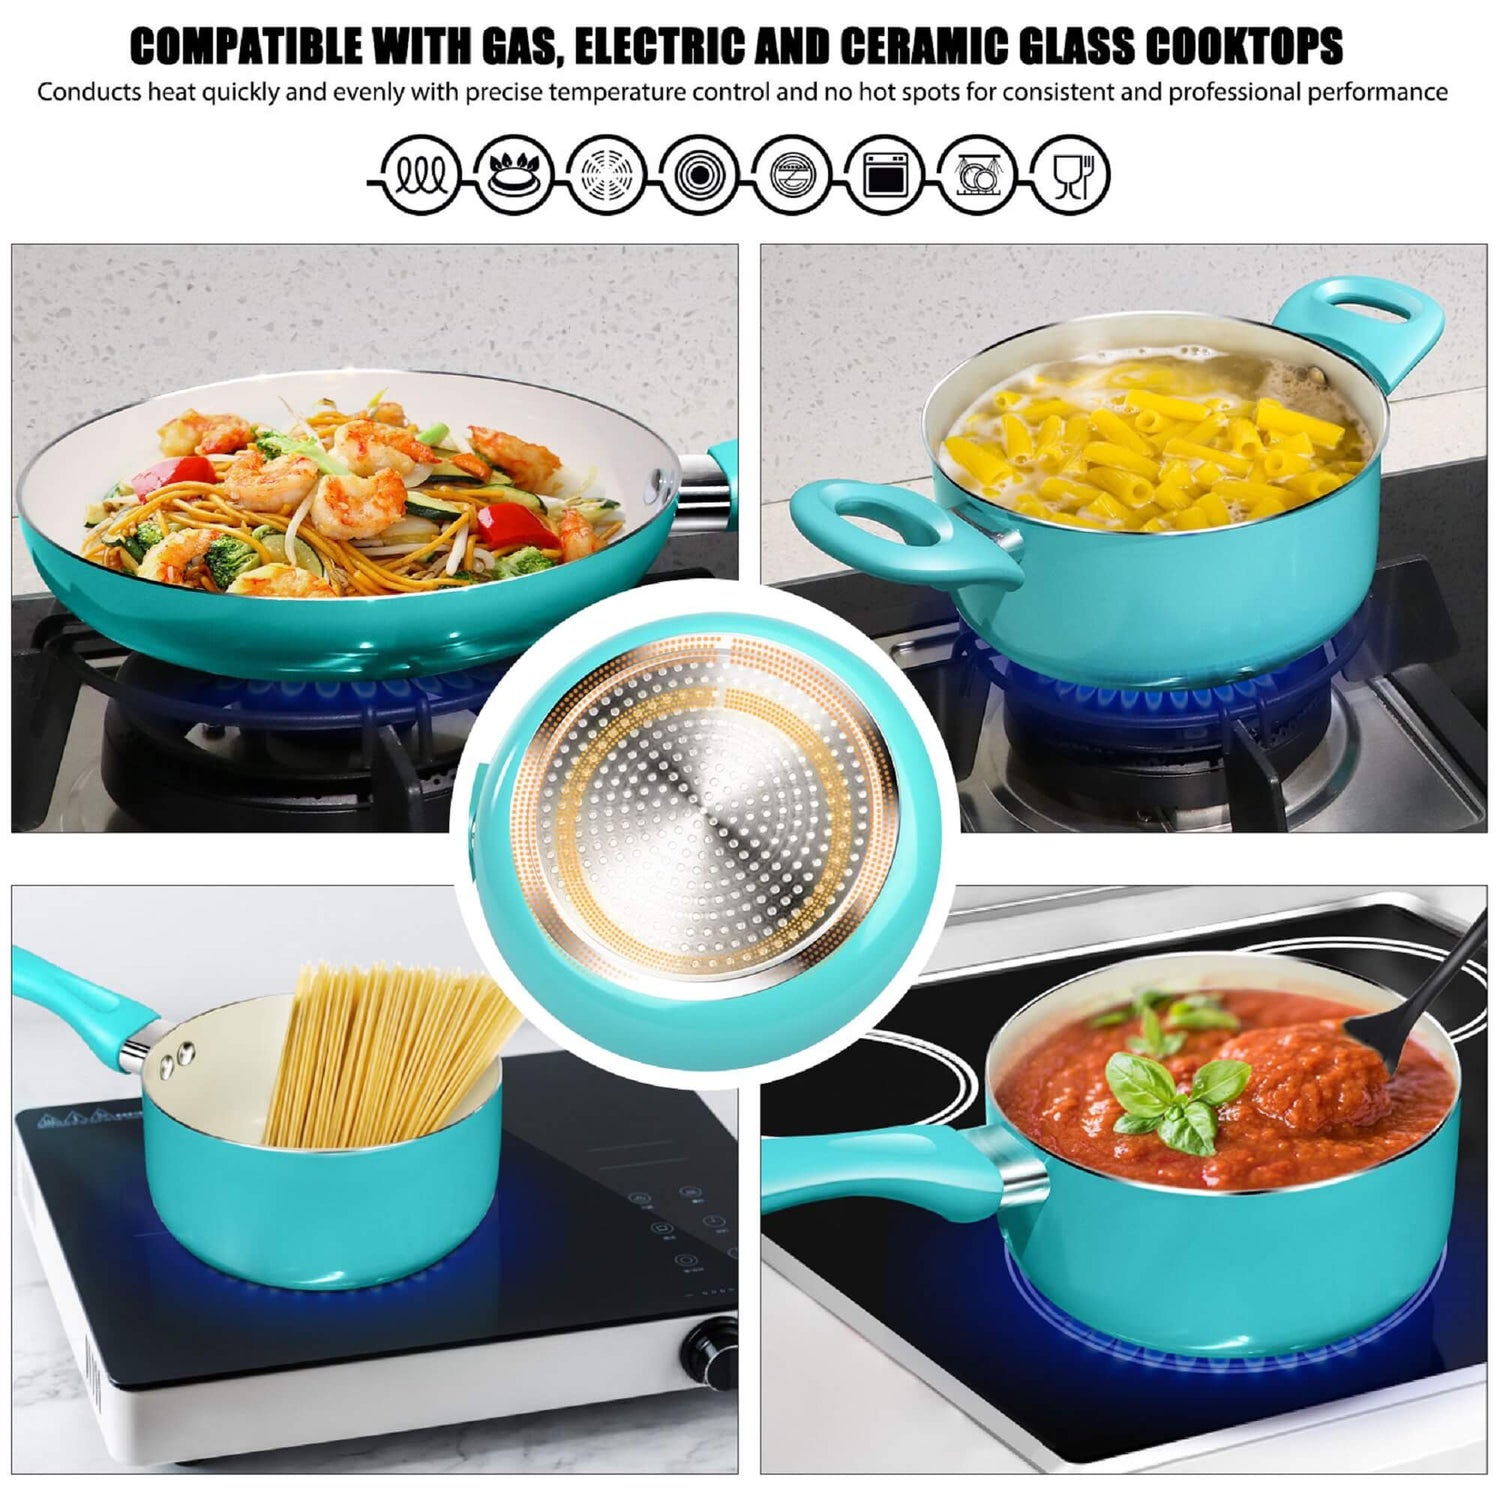 Nonstick Ceramic Cookware Set - The Perfect Gift